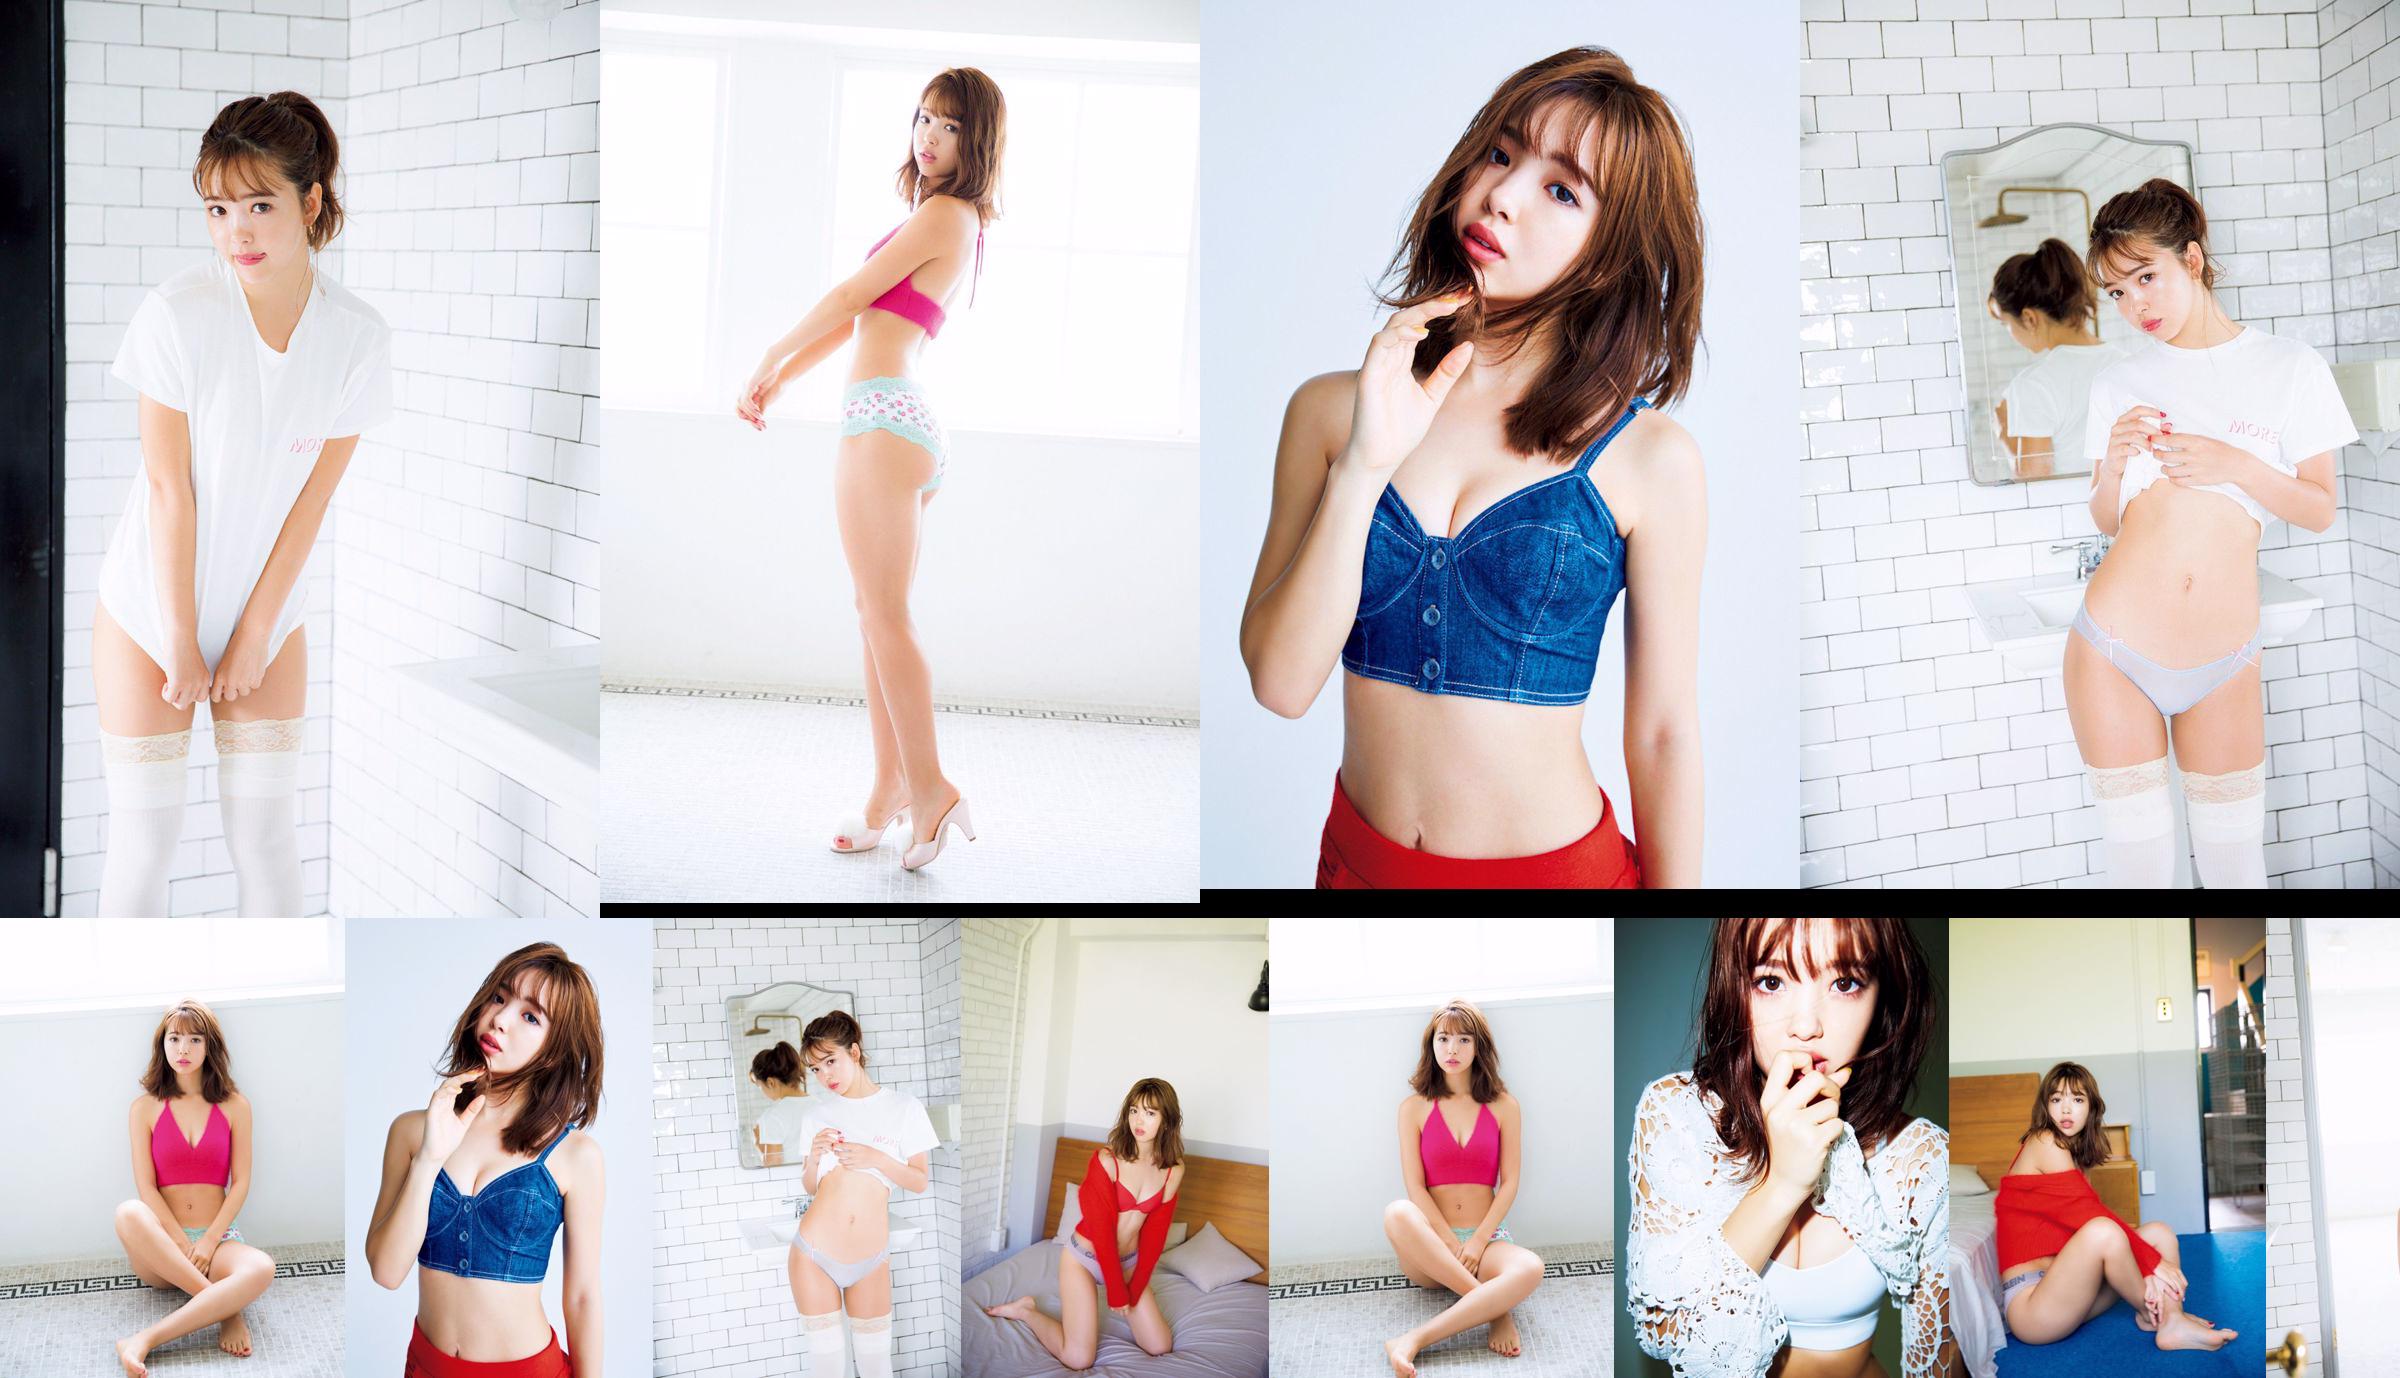 [FRIDAY] Nicole Fujita "Come to see the bust and hips ♡" Photo No.6fc3d3 Page 4